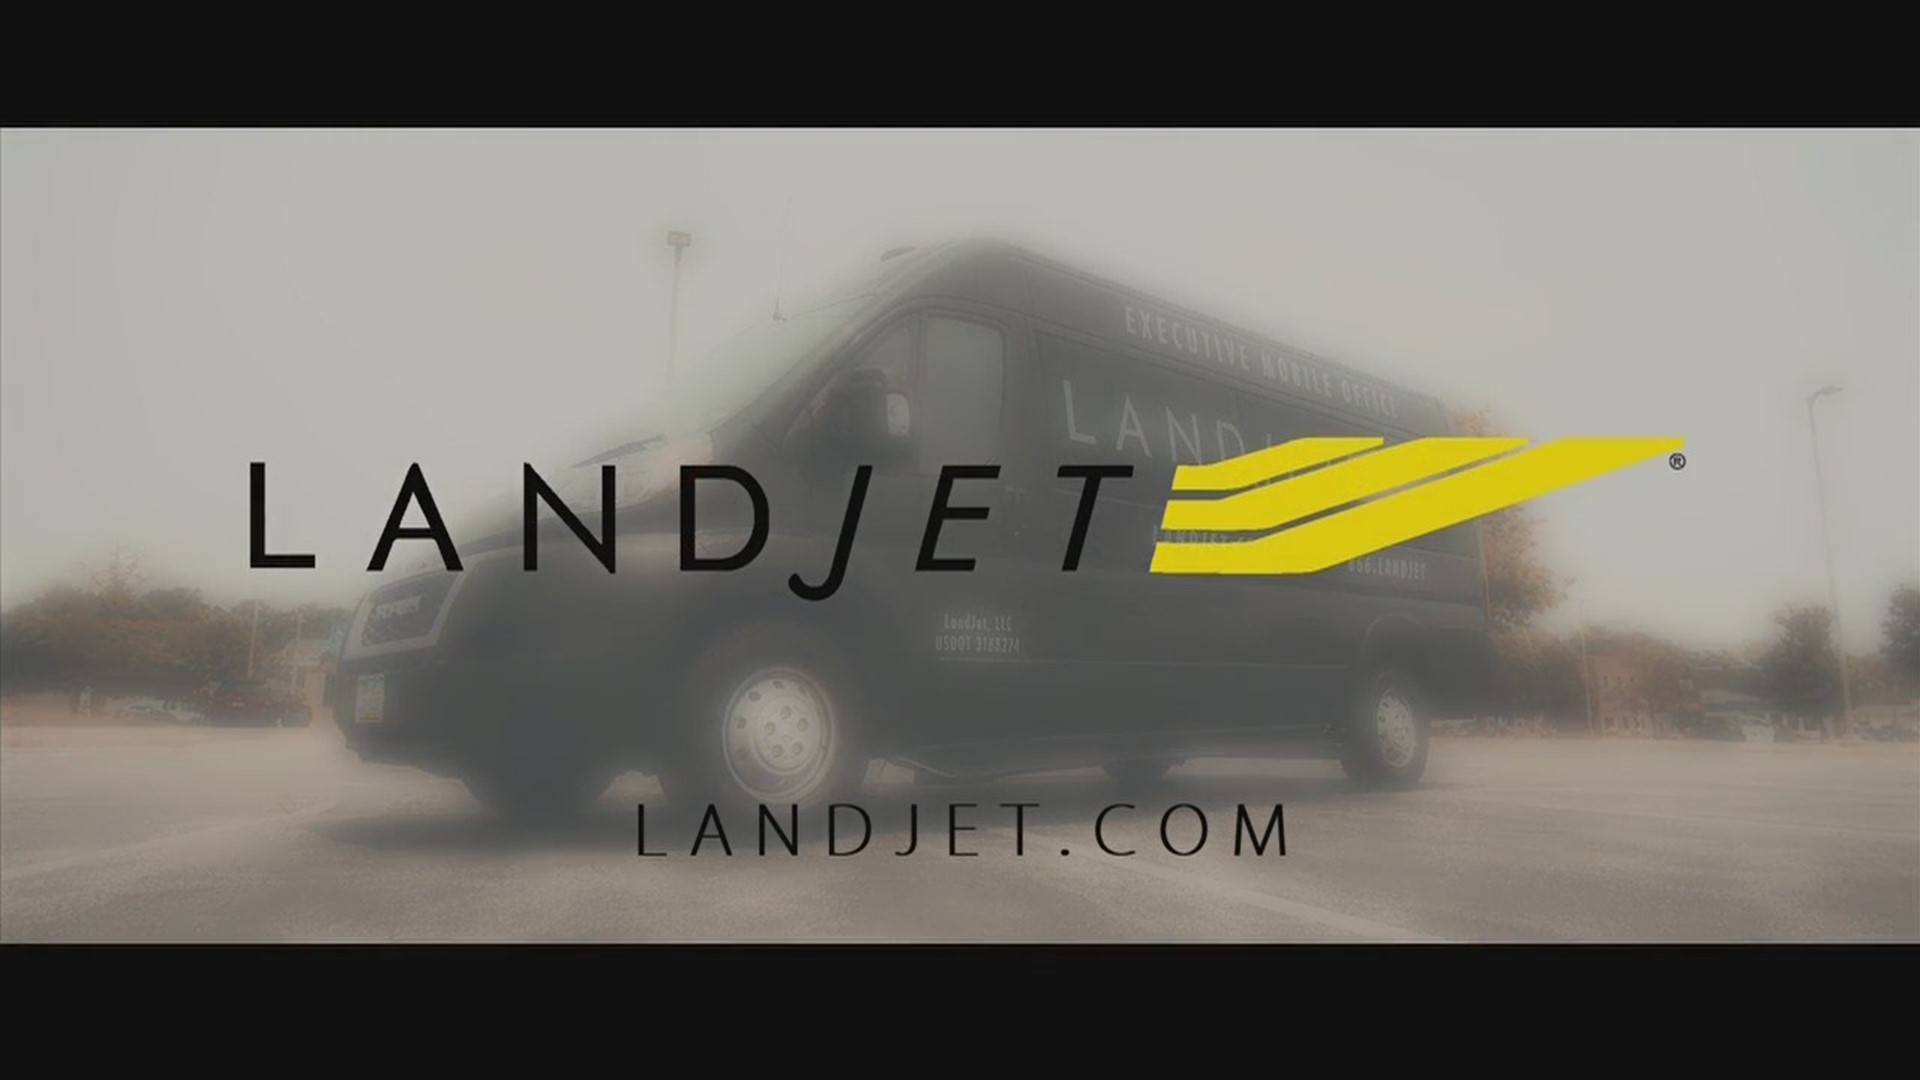 Landjet, a mobile office to maximize your time